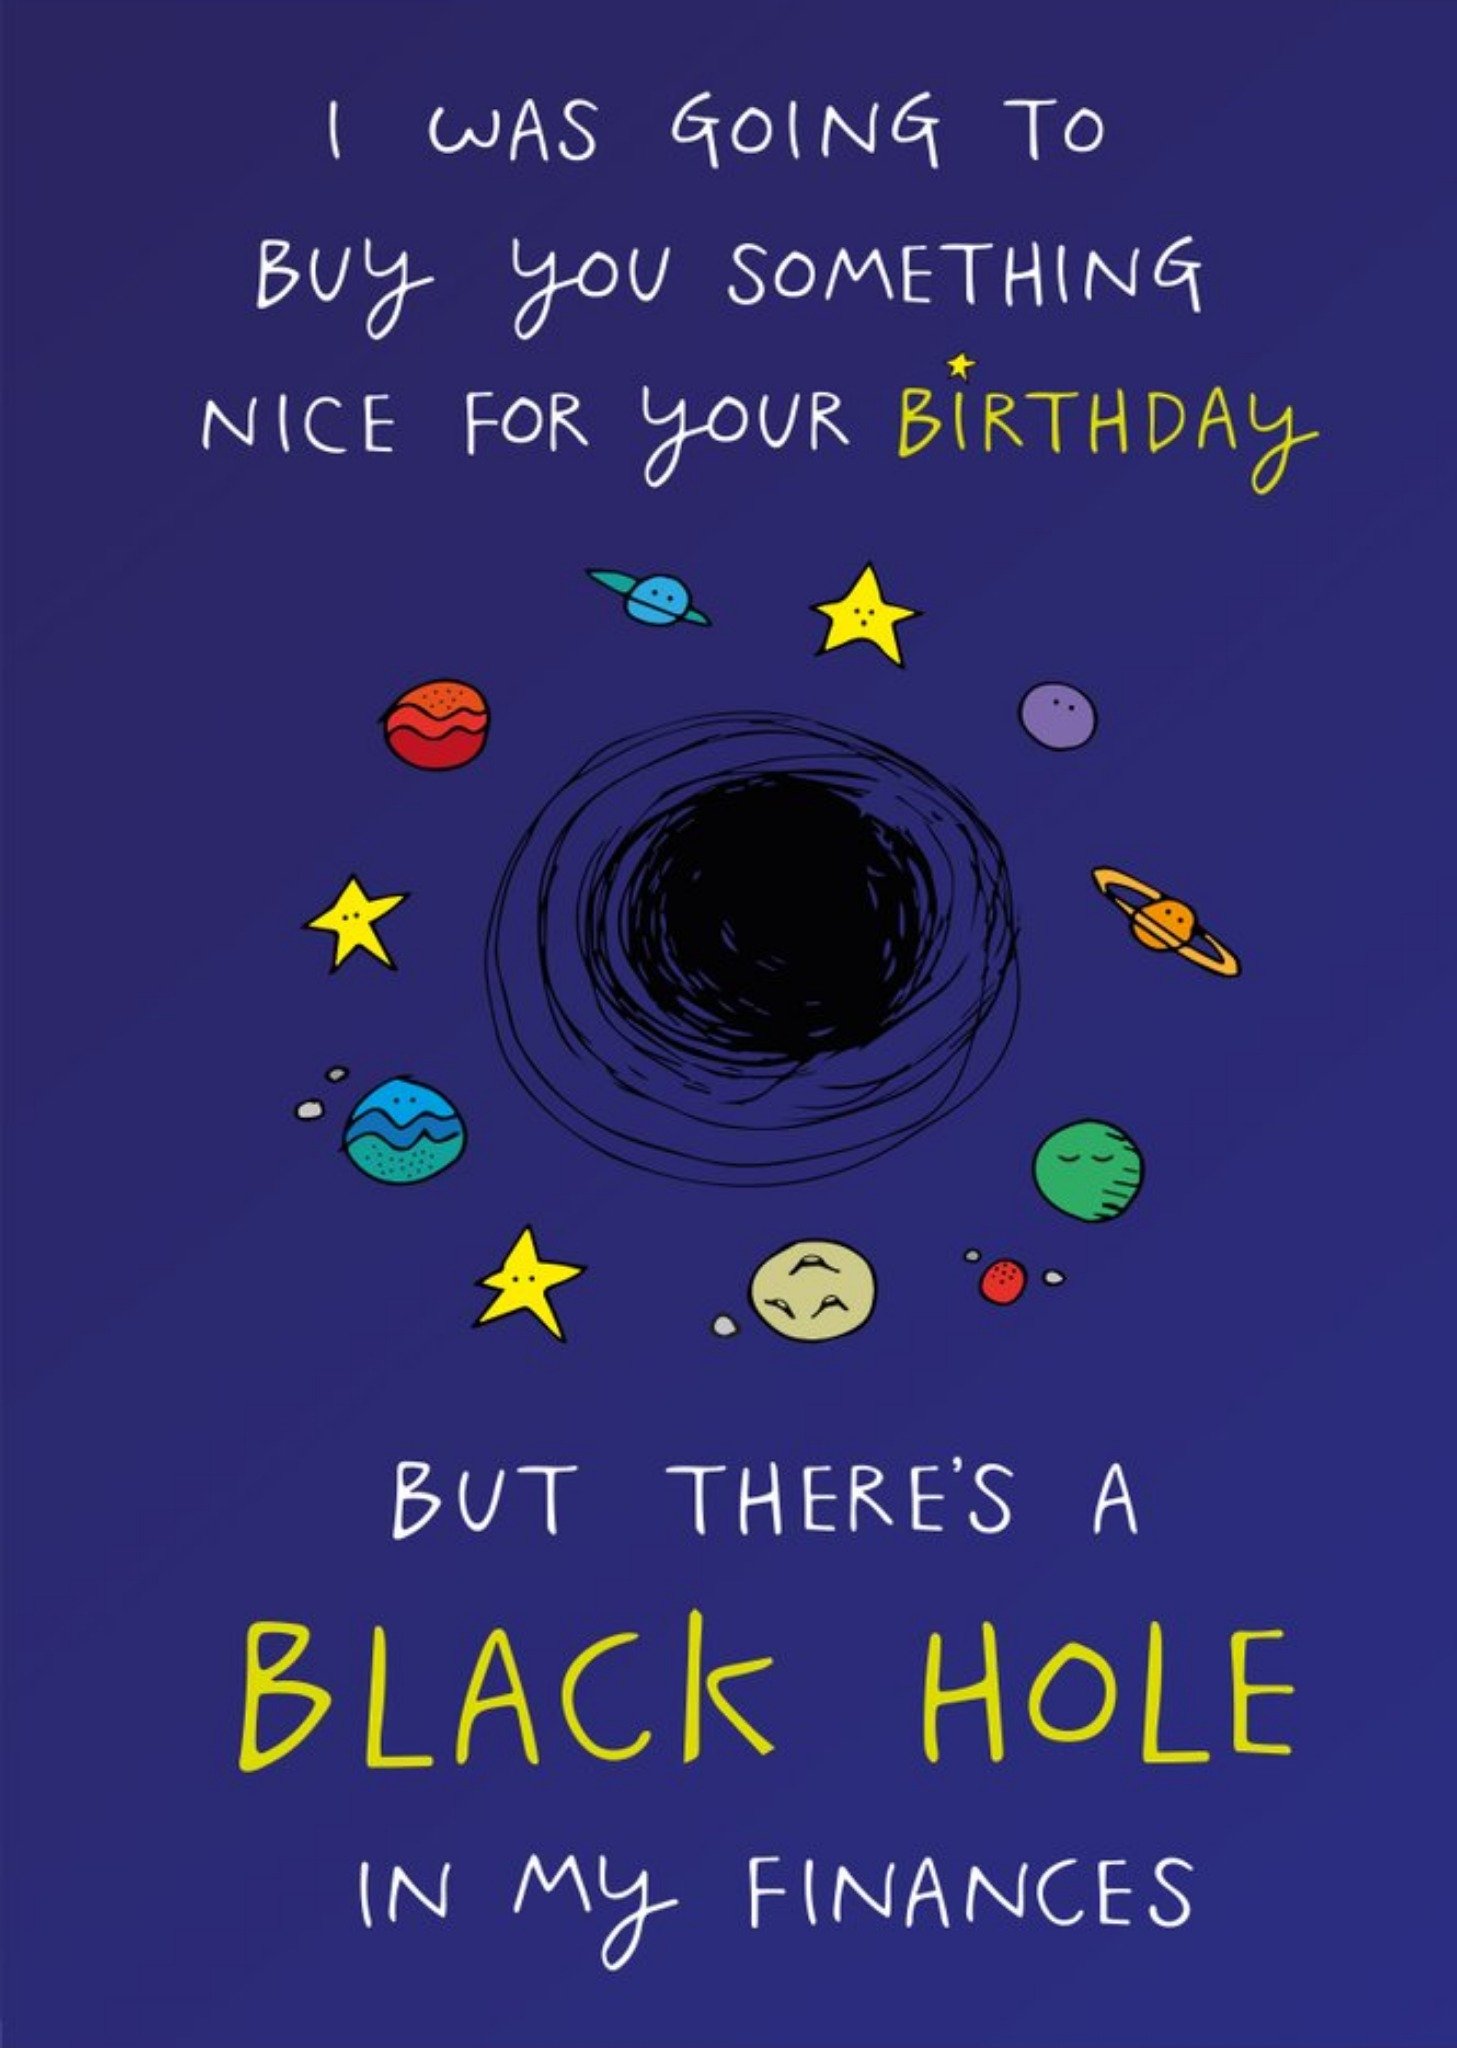 Moonpig There's A Black Hole In My Finances Birthday Card Ecard